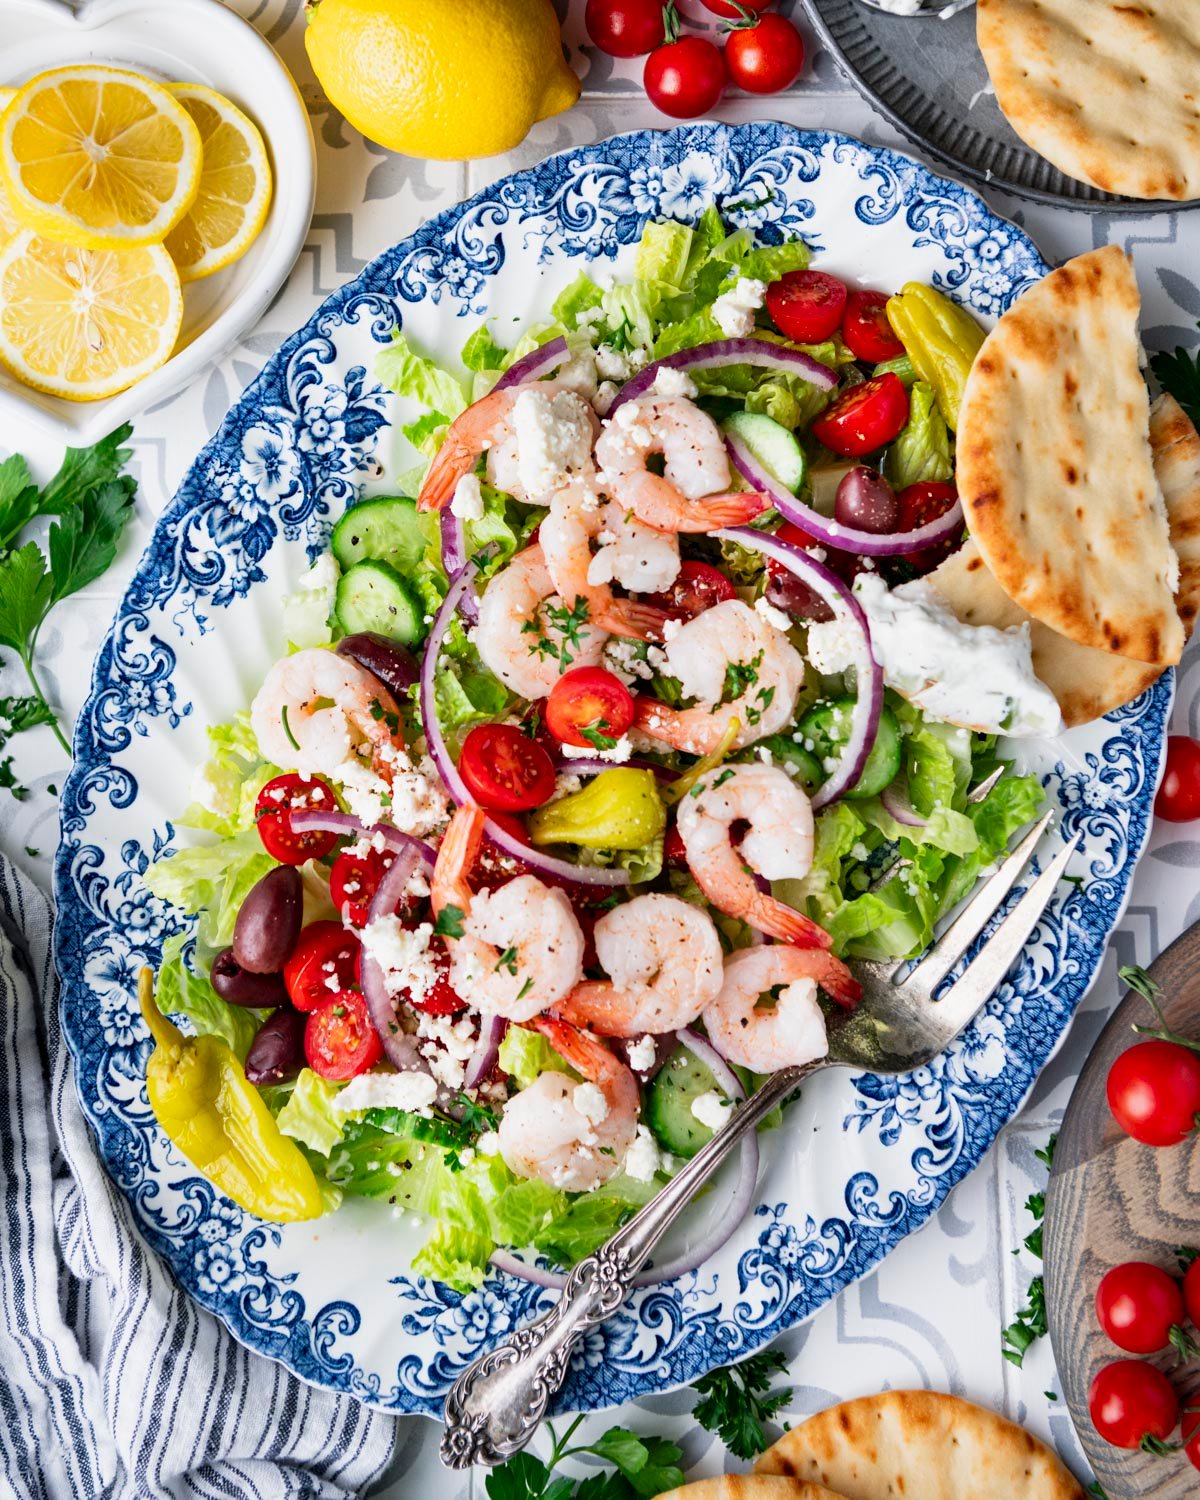 Overhead image of greek salad with shrimp and a side of pita bread and hummus.